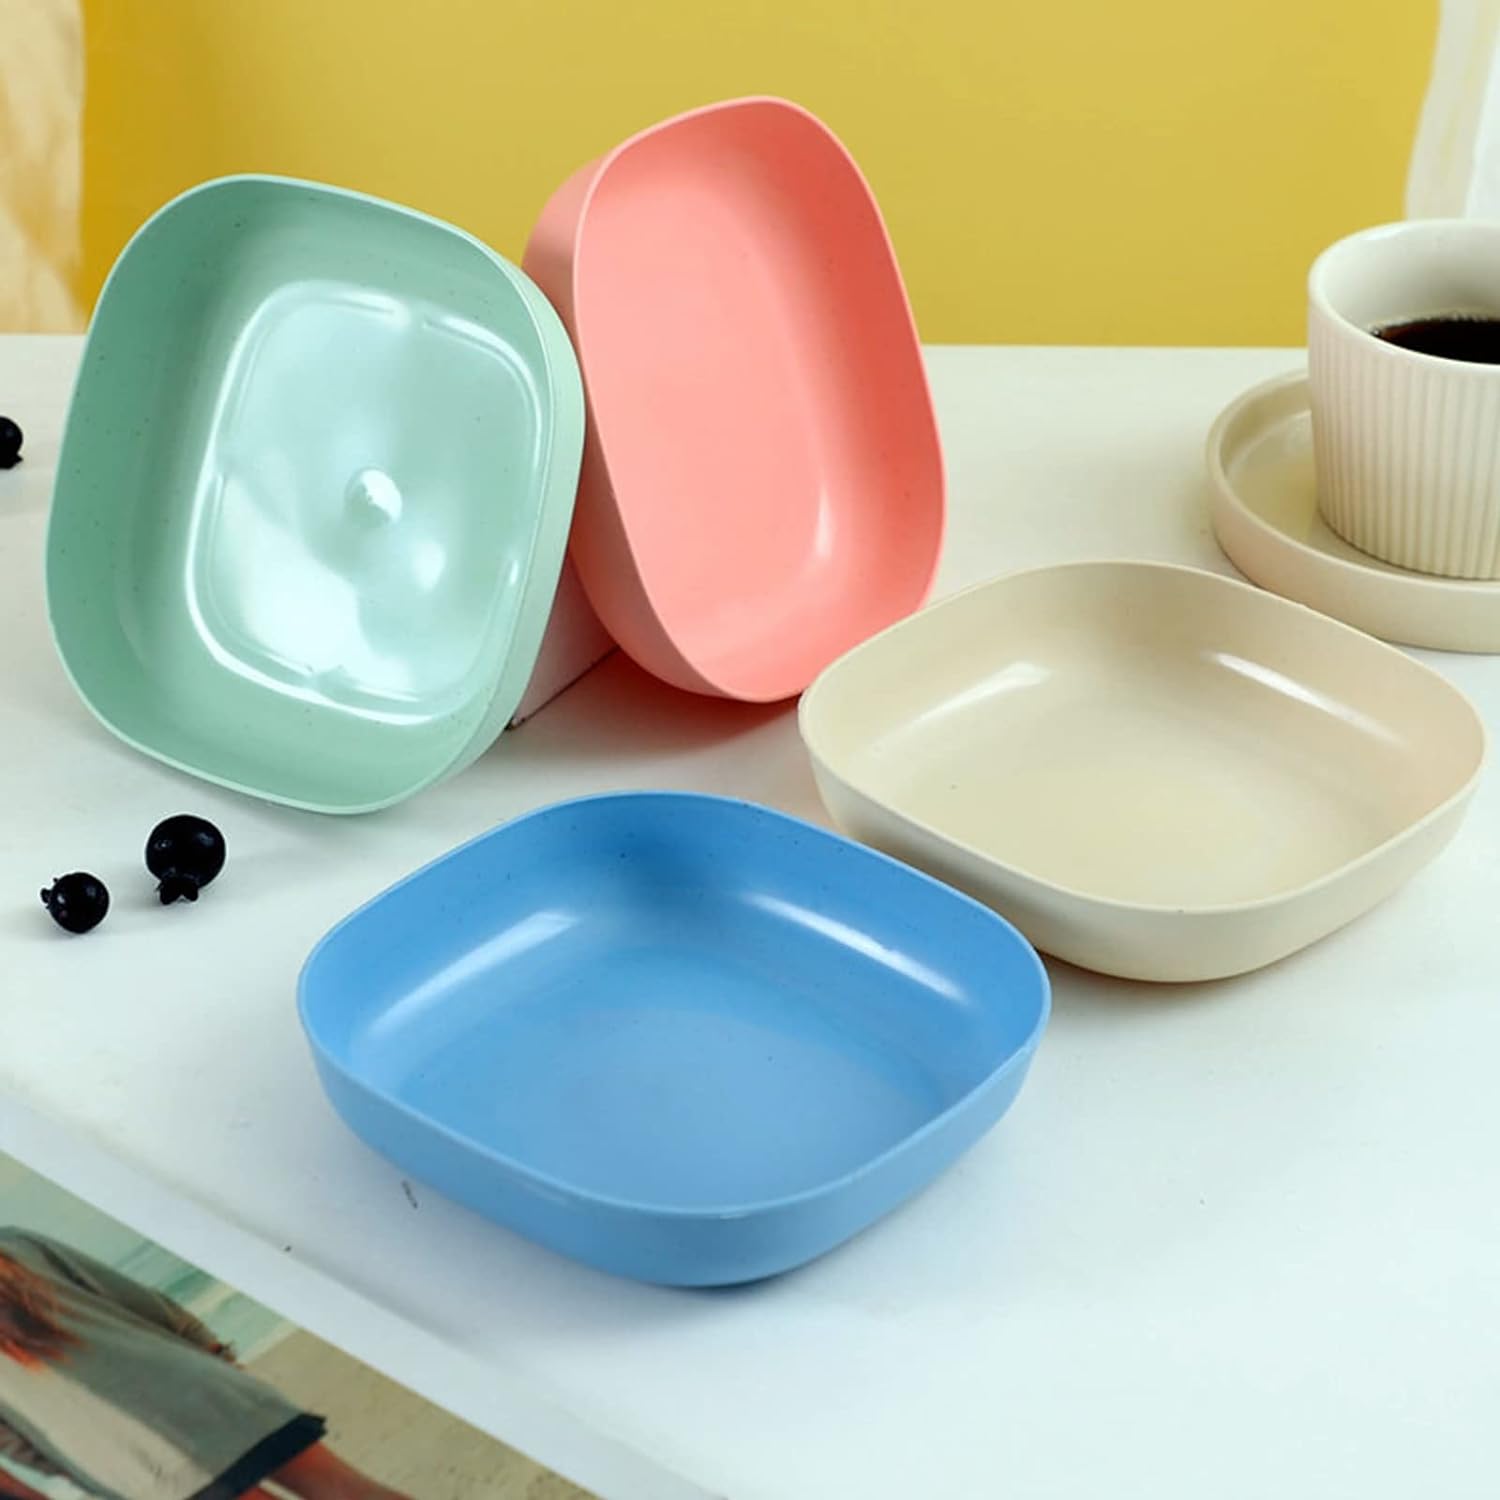 10 Pc Plastic Plates with Holder